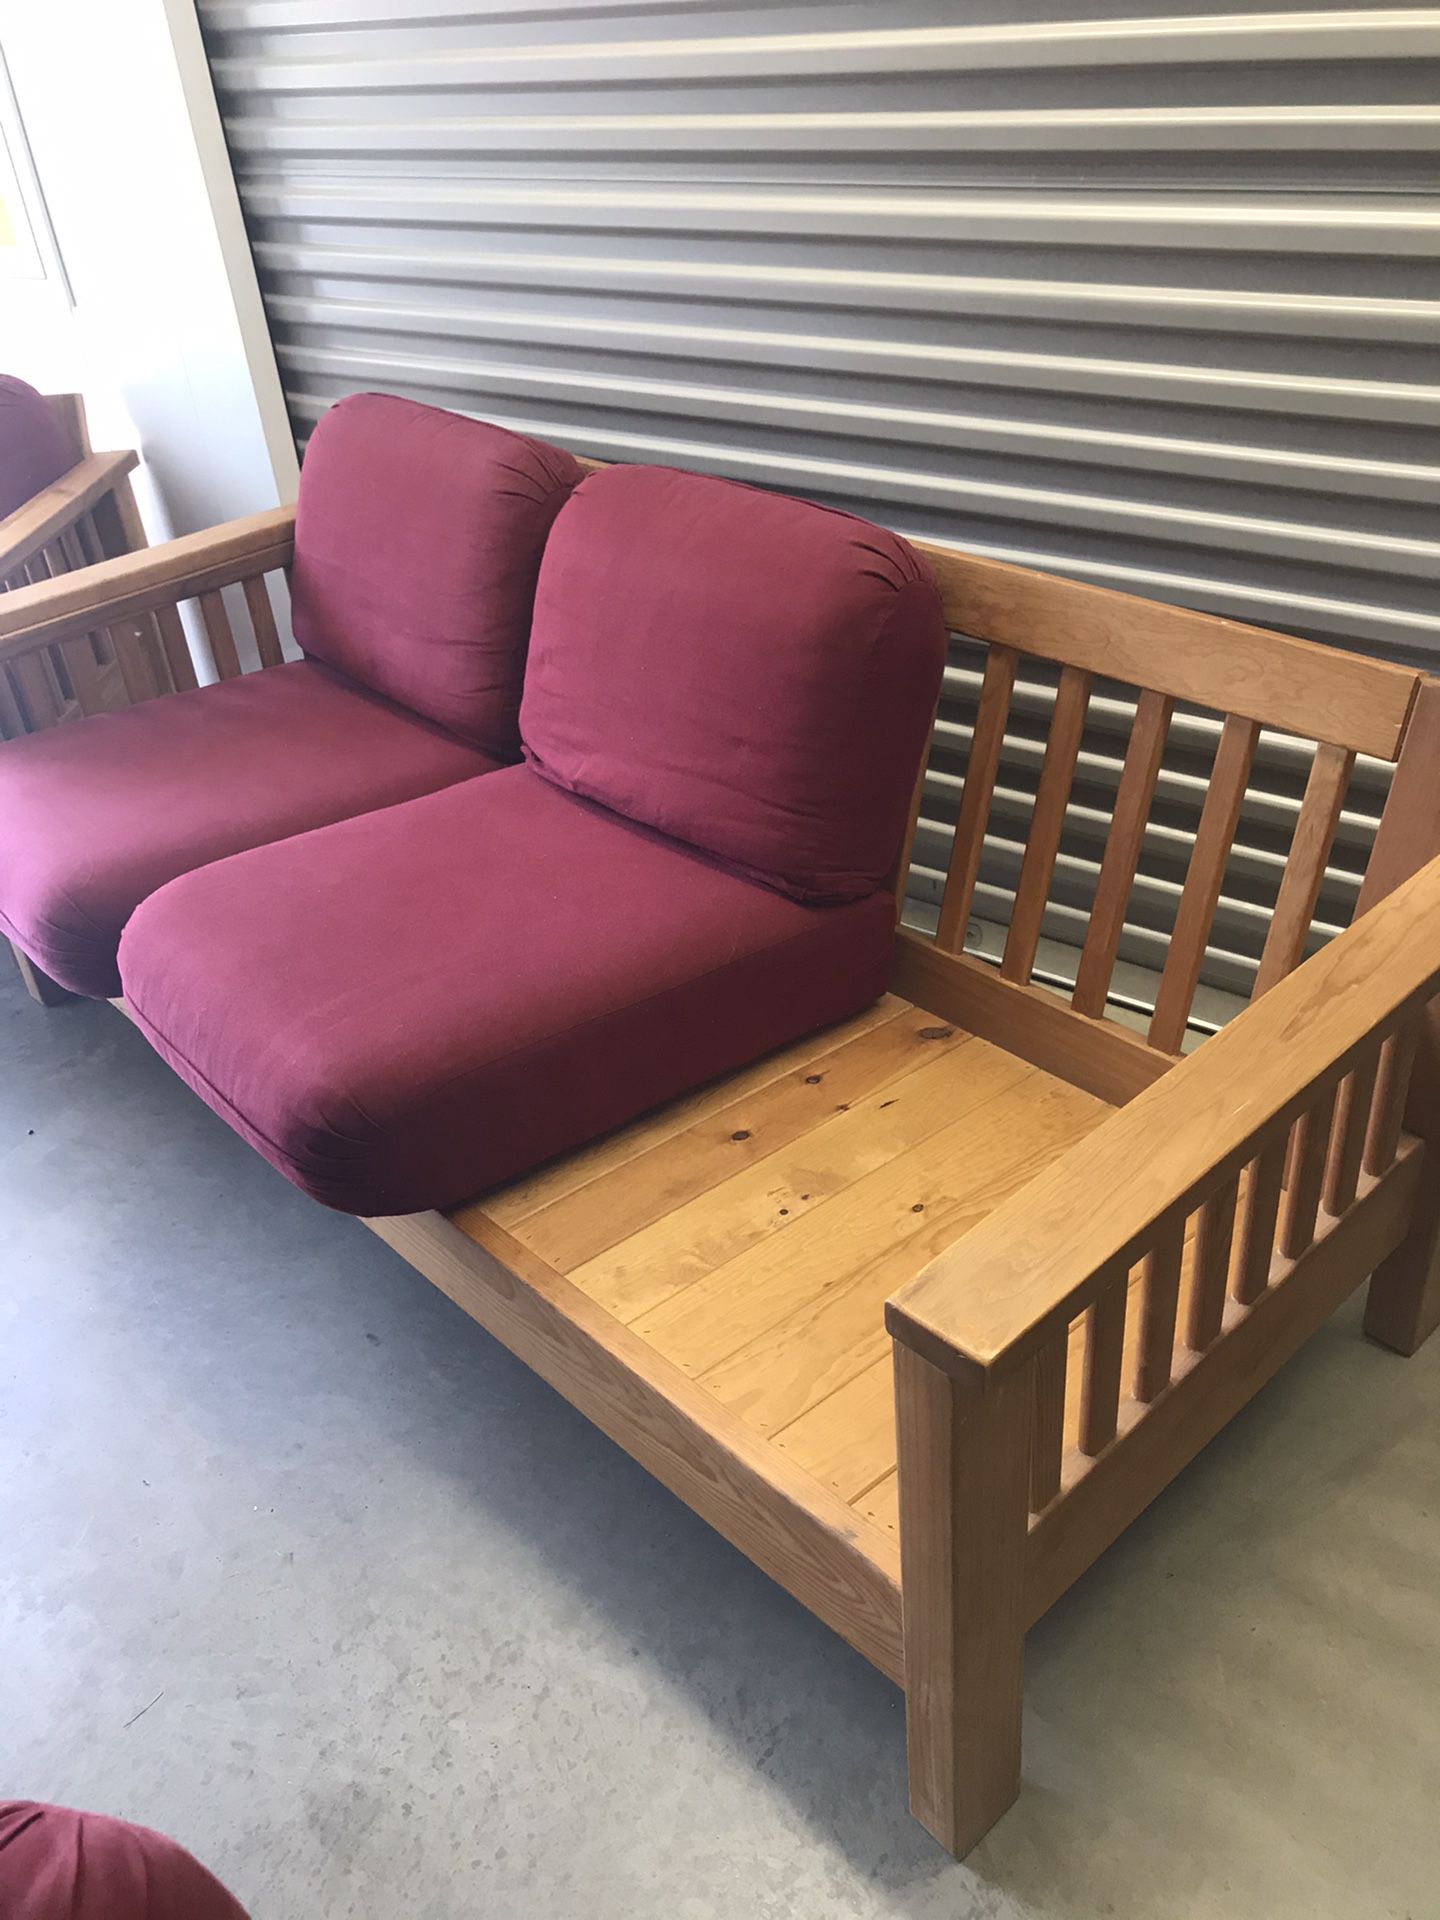 Solid wood cargo furniture